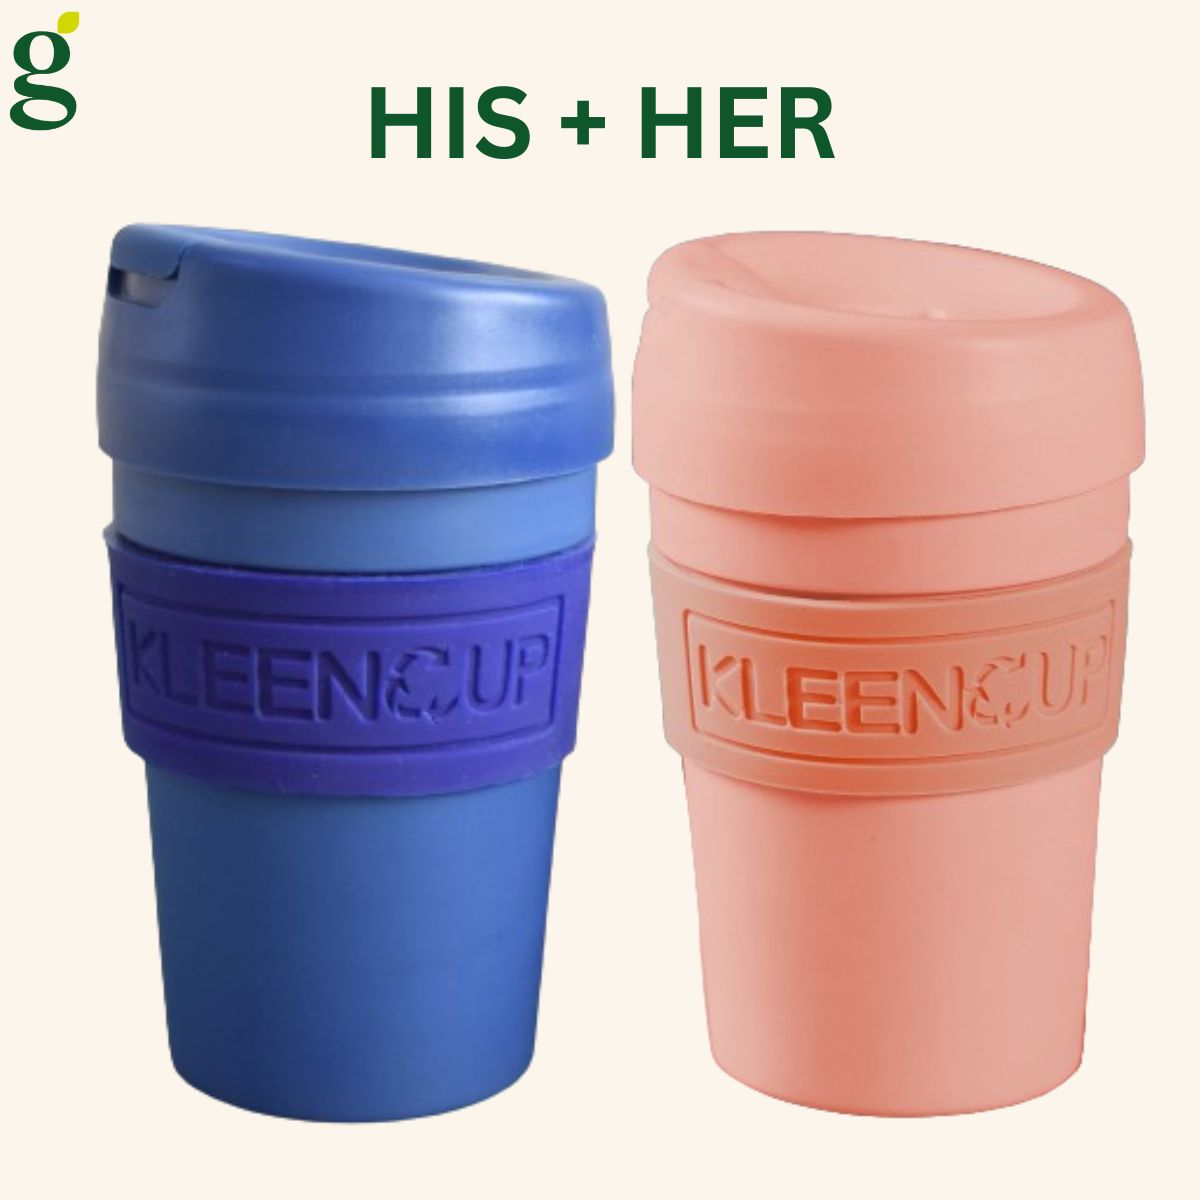 His & Her Travel Cup gift set-Eco gifting